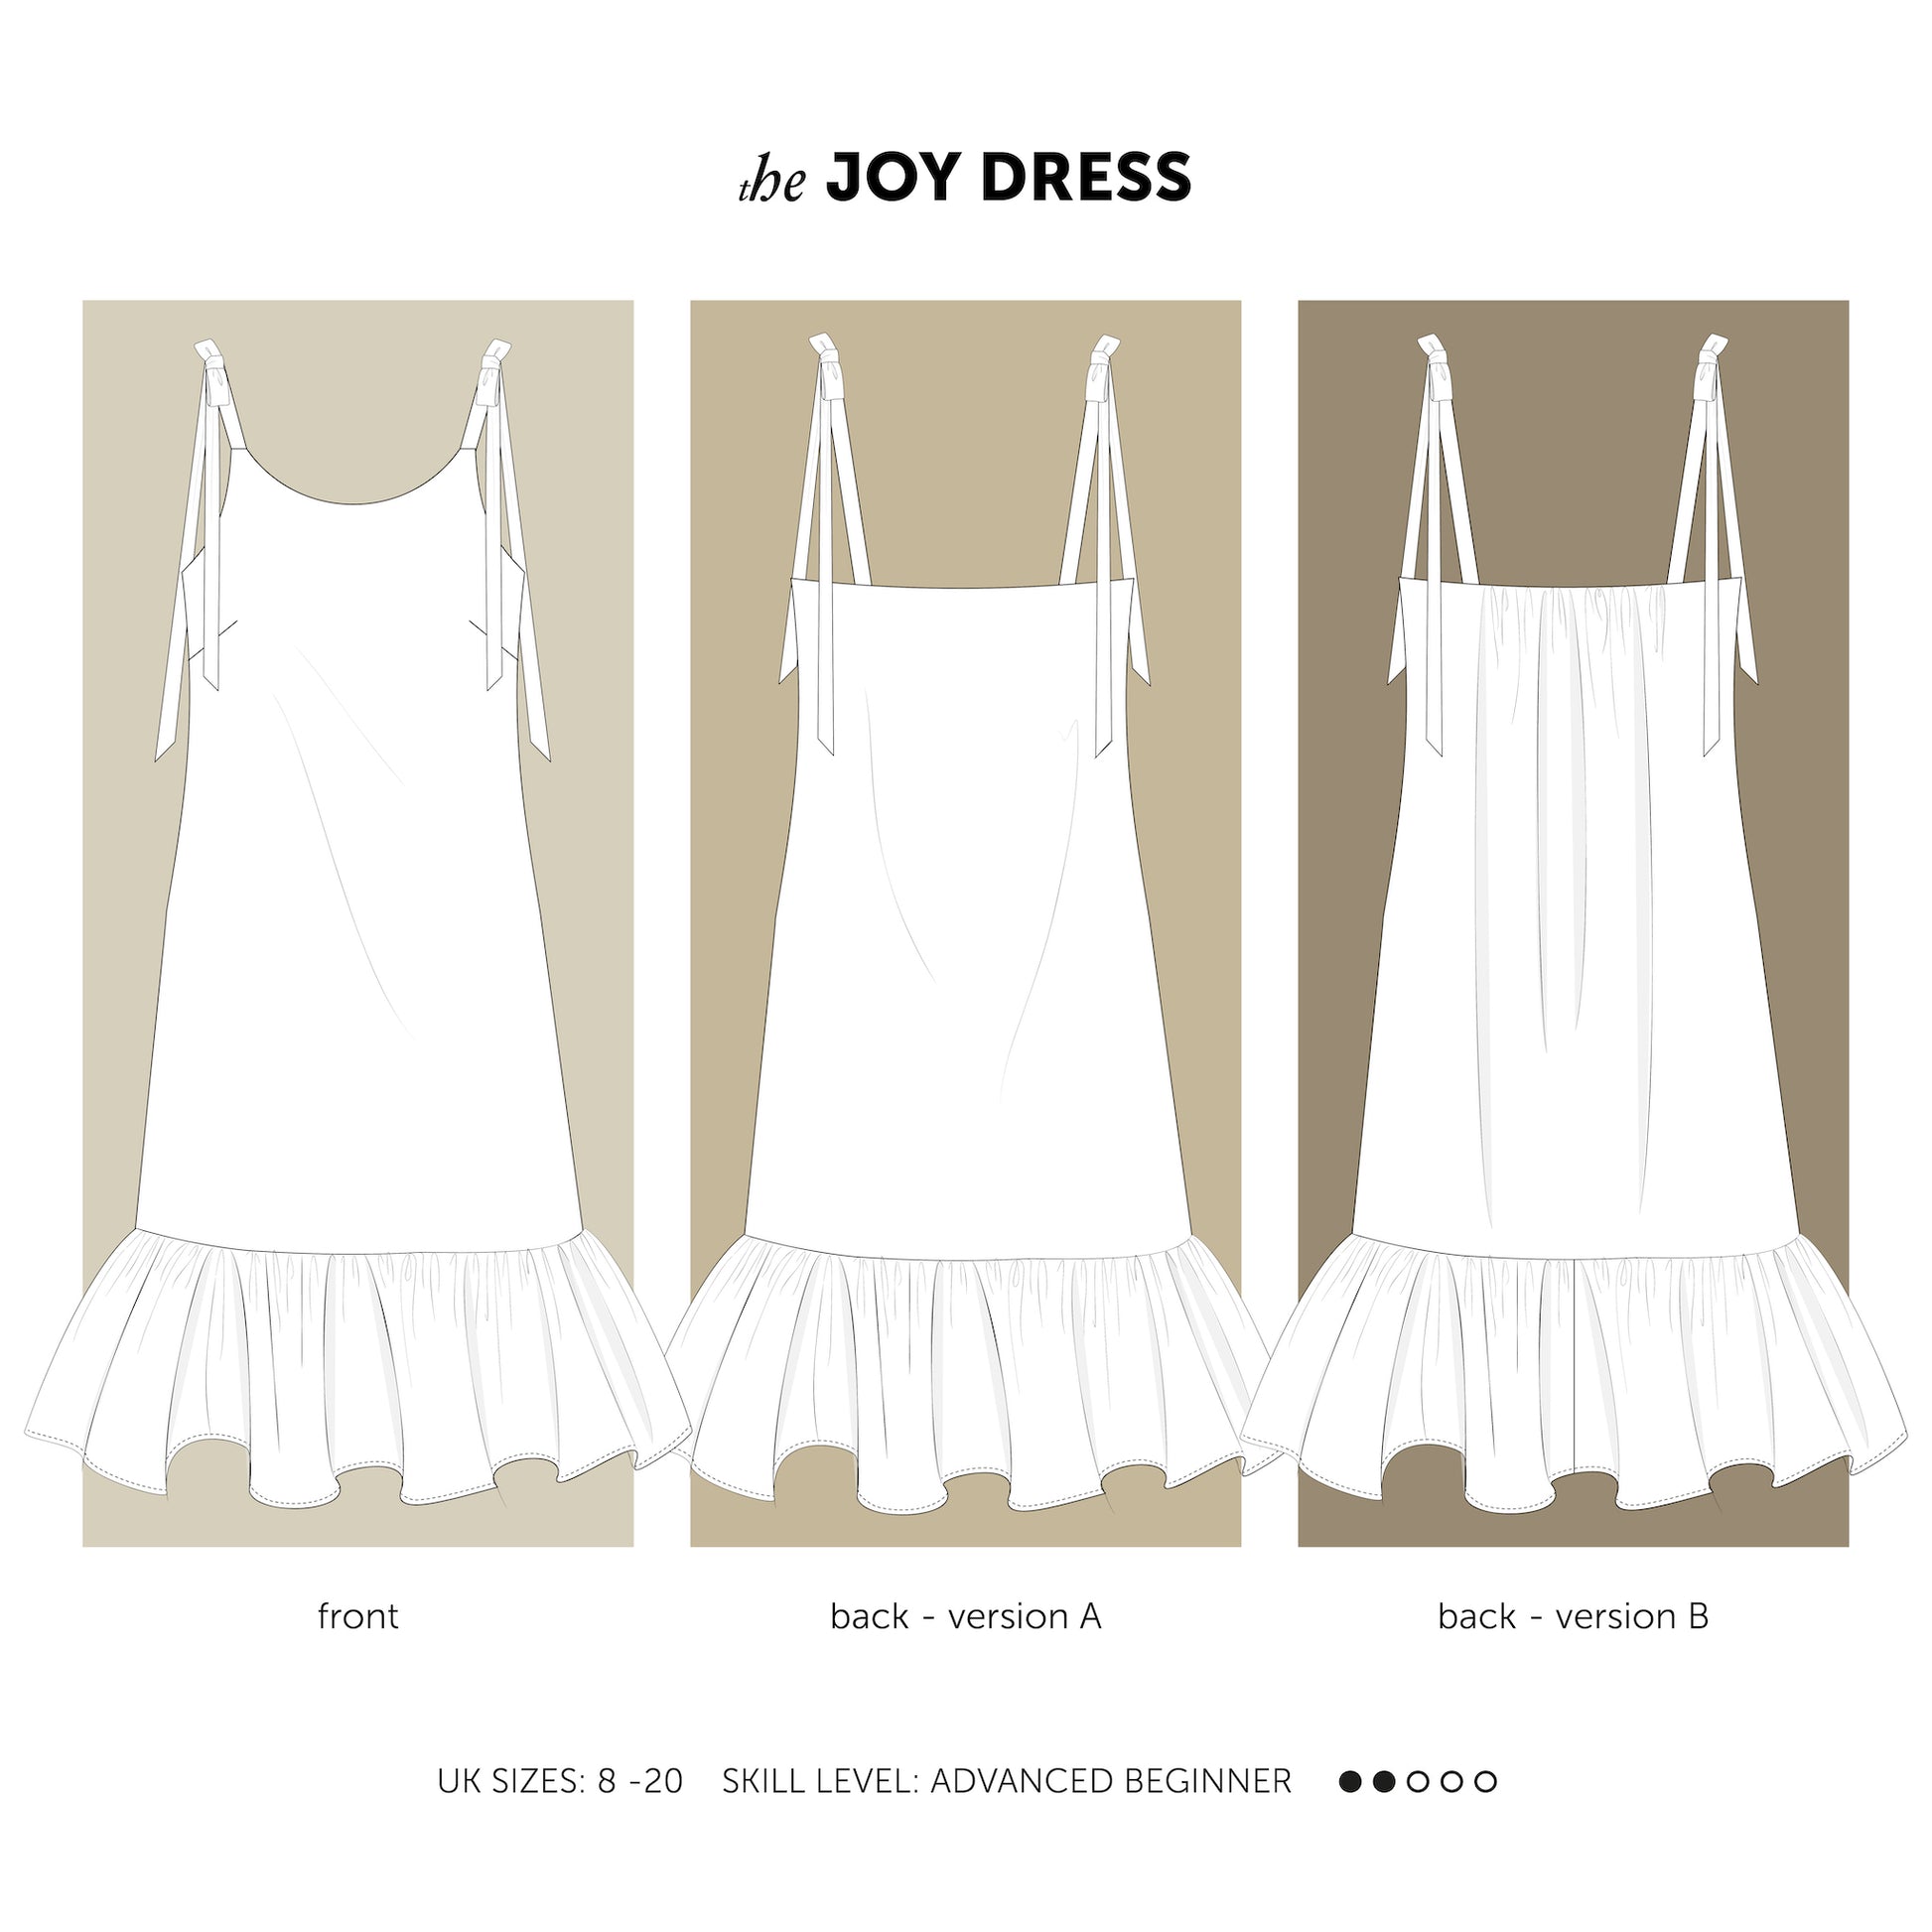 The Joy Dress summer sundress sewing pattern, camisole, slip dress pattern indie sewing patterns, contemporary and modern sewing patterns made in the UK.